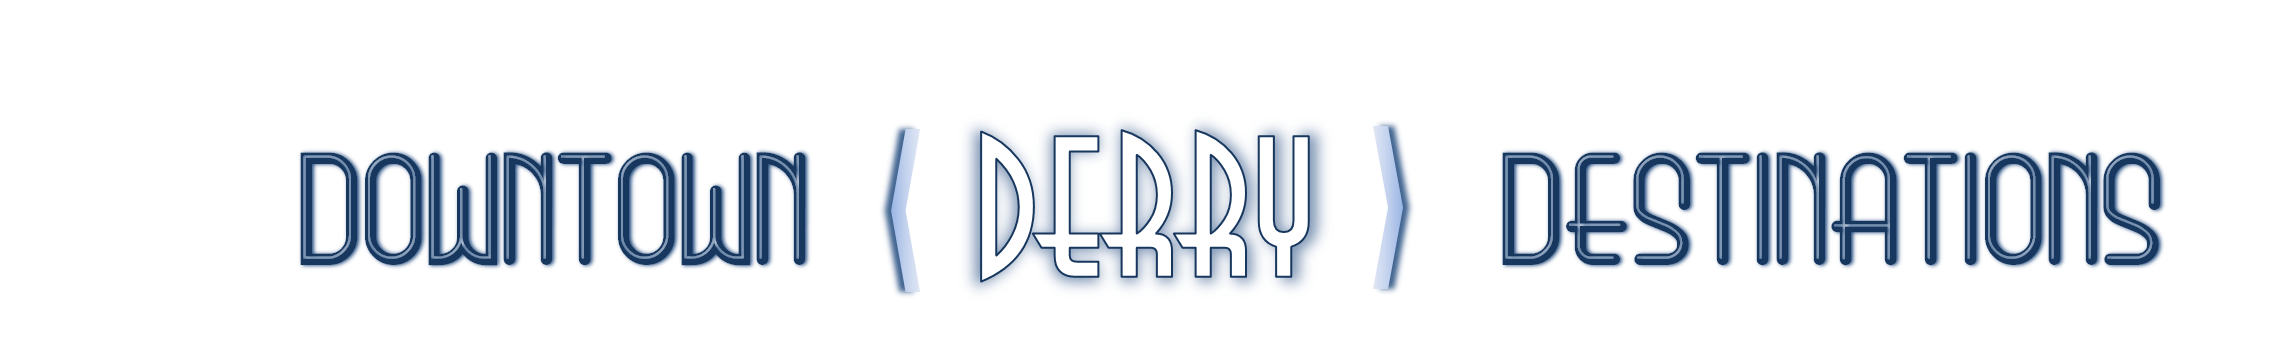 Derry.png